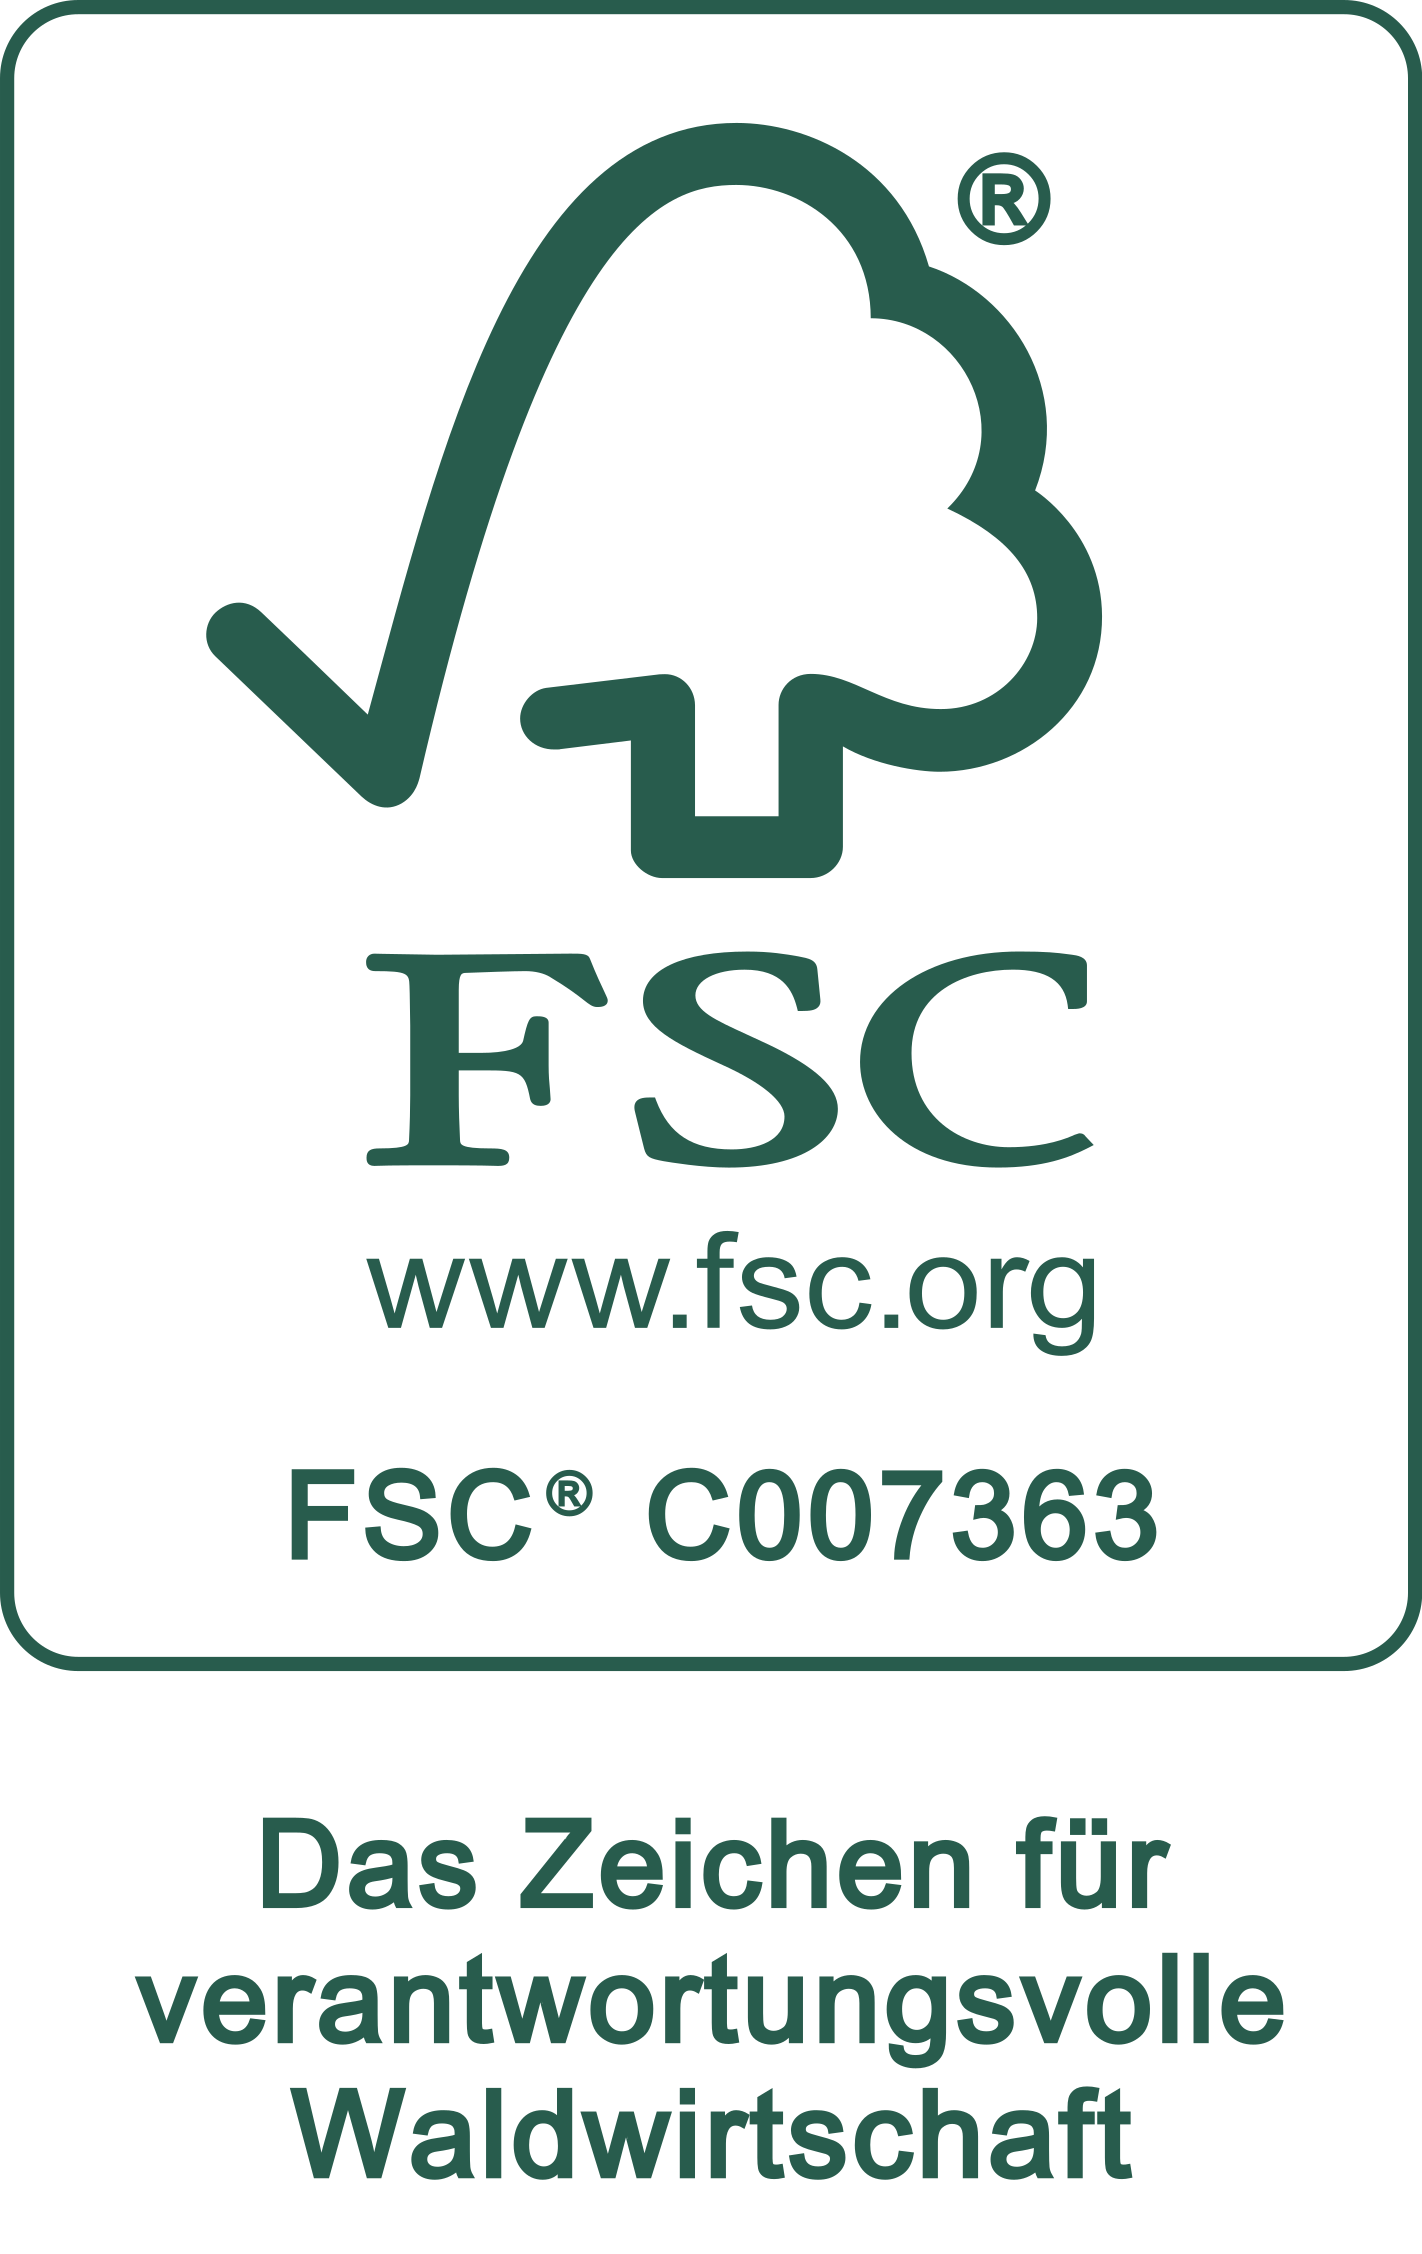 FSC C007363 Promotional with text Portrait Green On White r 9a Cc RY